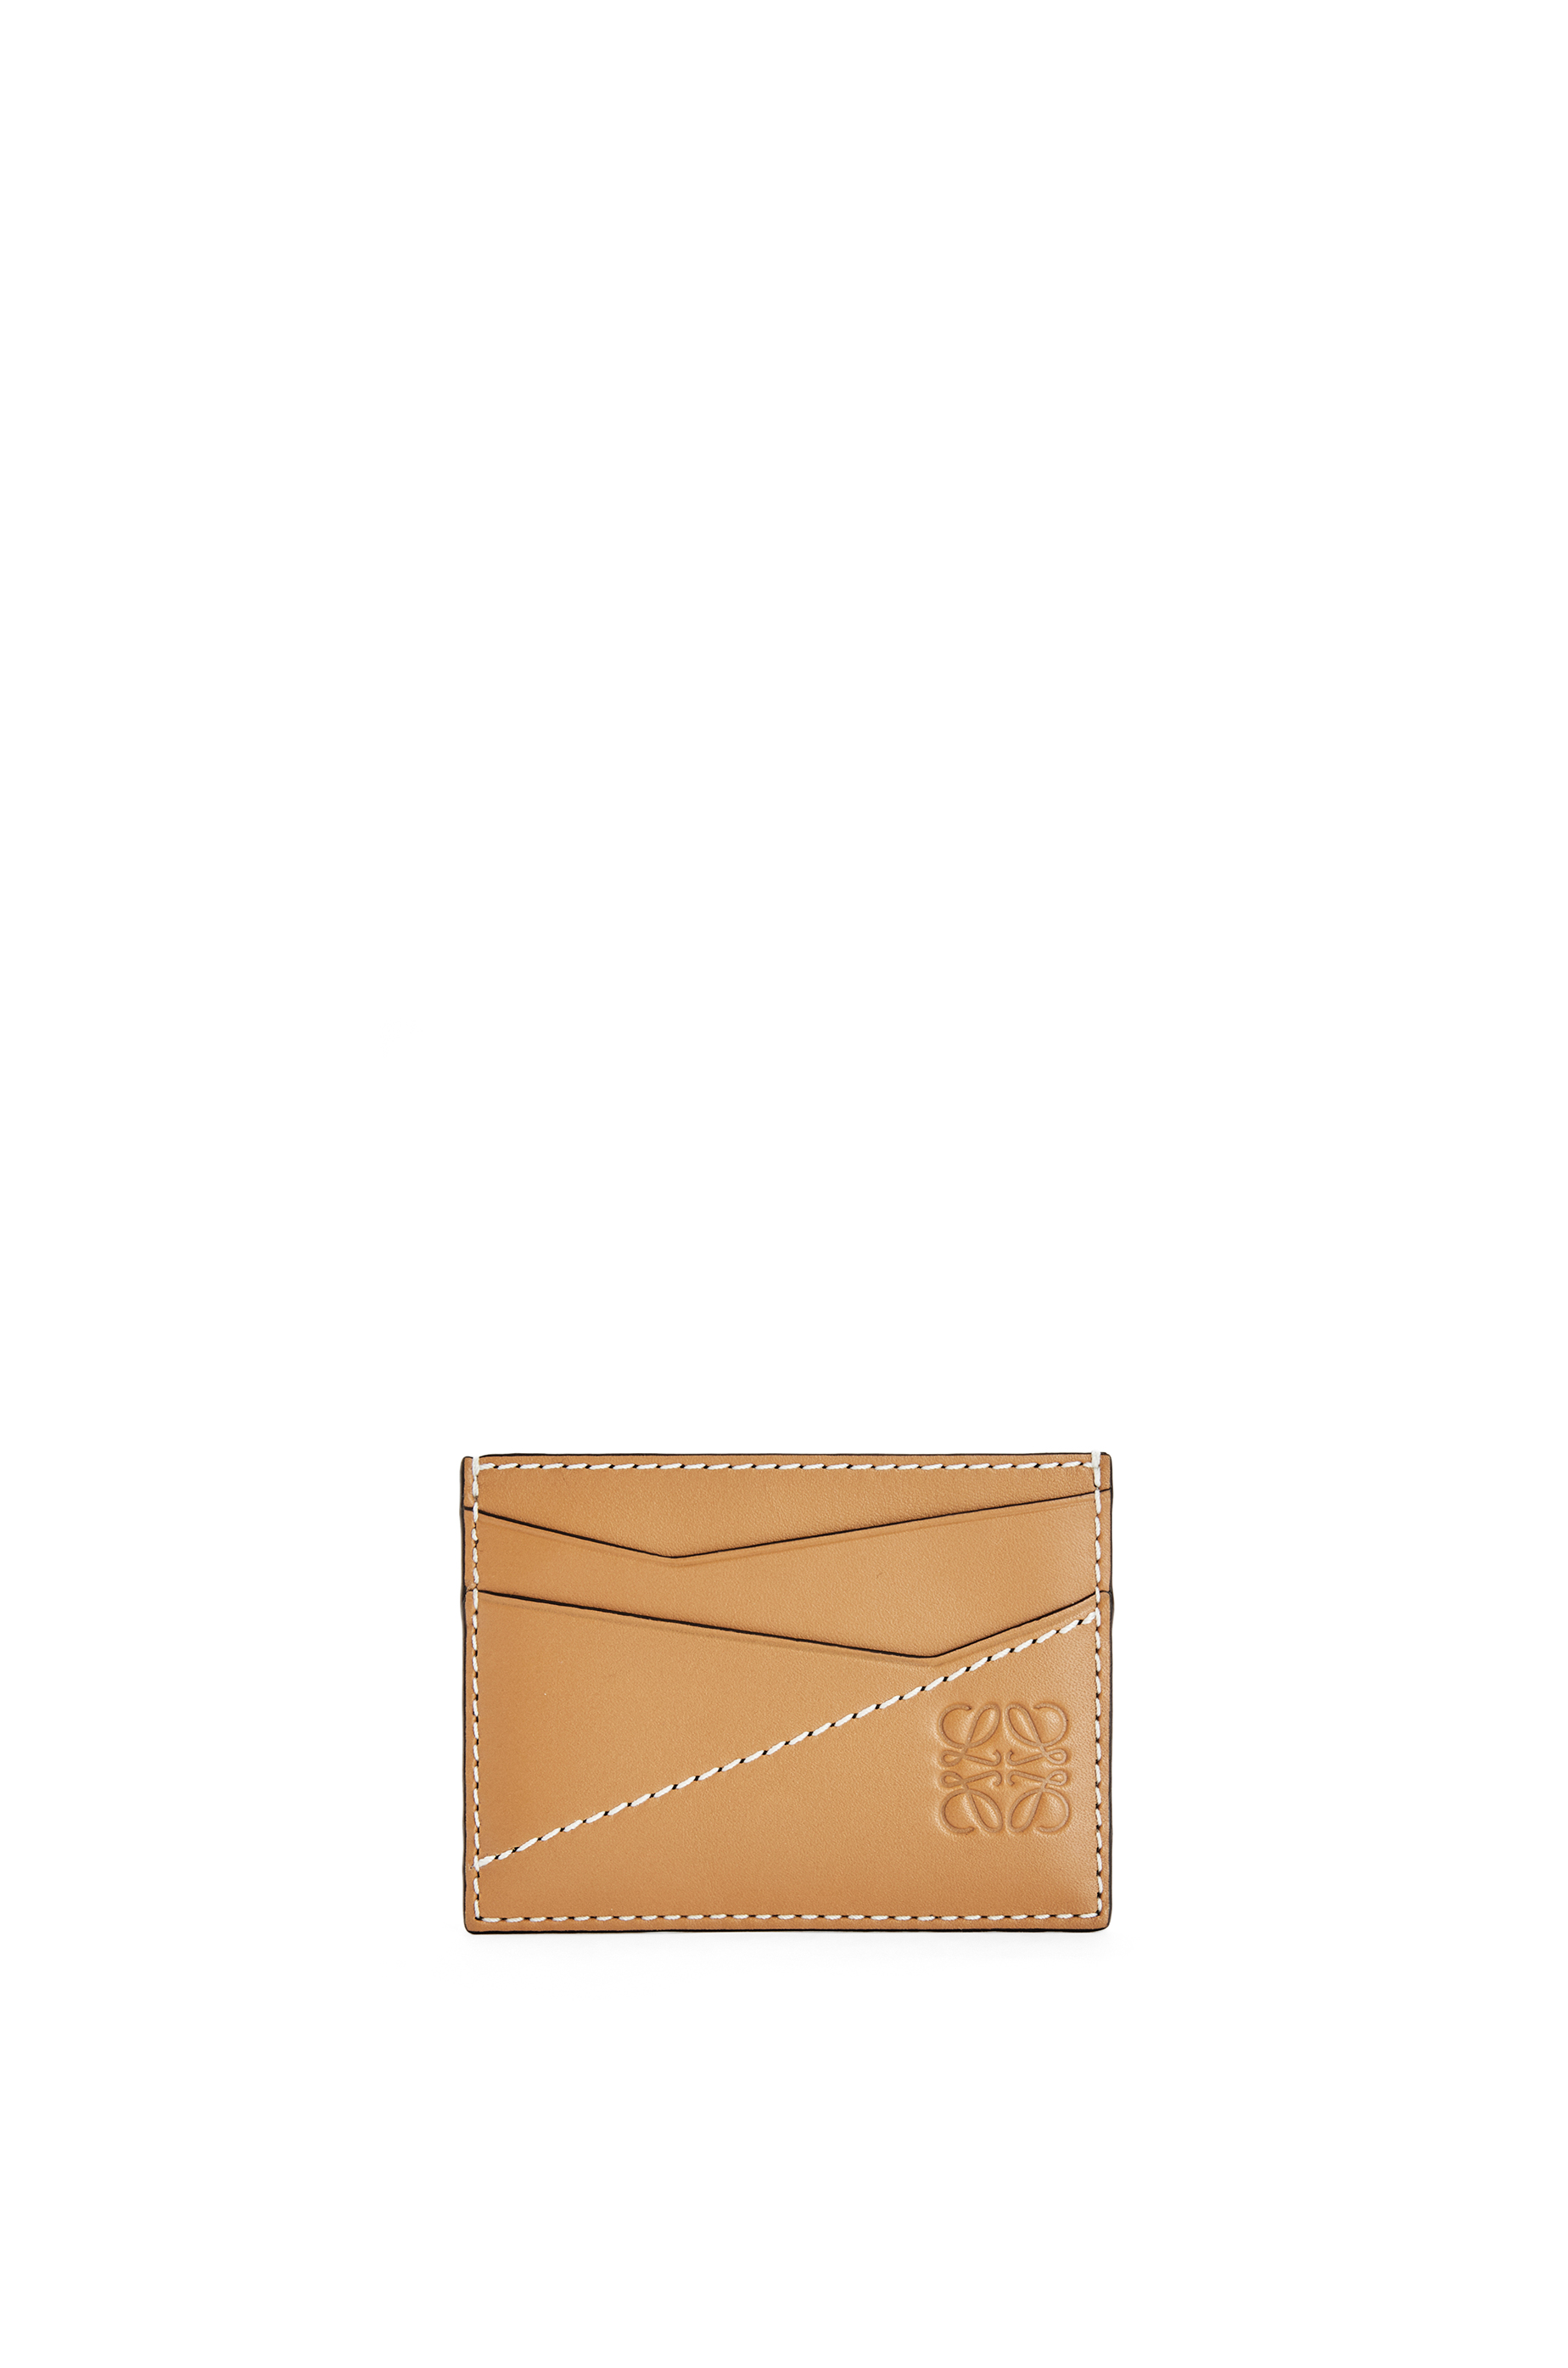 Puzzle stitches plain cardholder in smooth calfskin